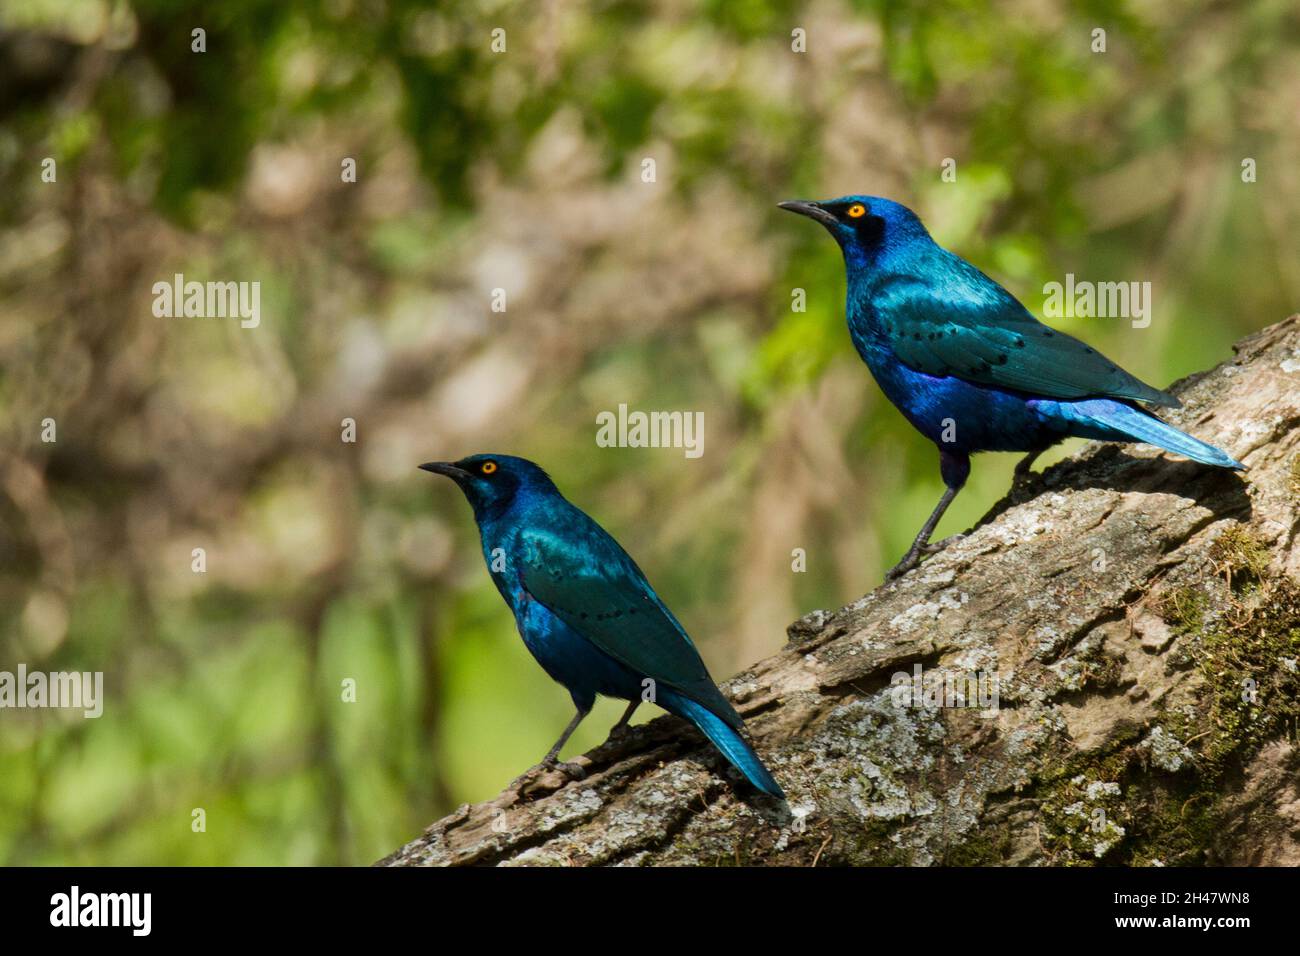 Greater blue-eared glossy starling (Lamprotornis chalybaeus). This glossy starling is found in the bushlands and woodlands of Africa. It forms large f Stock Photo